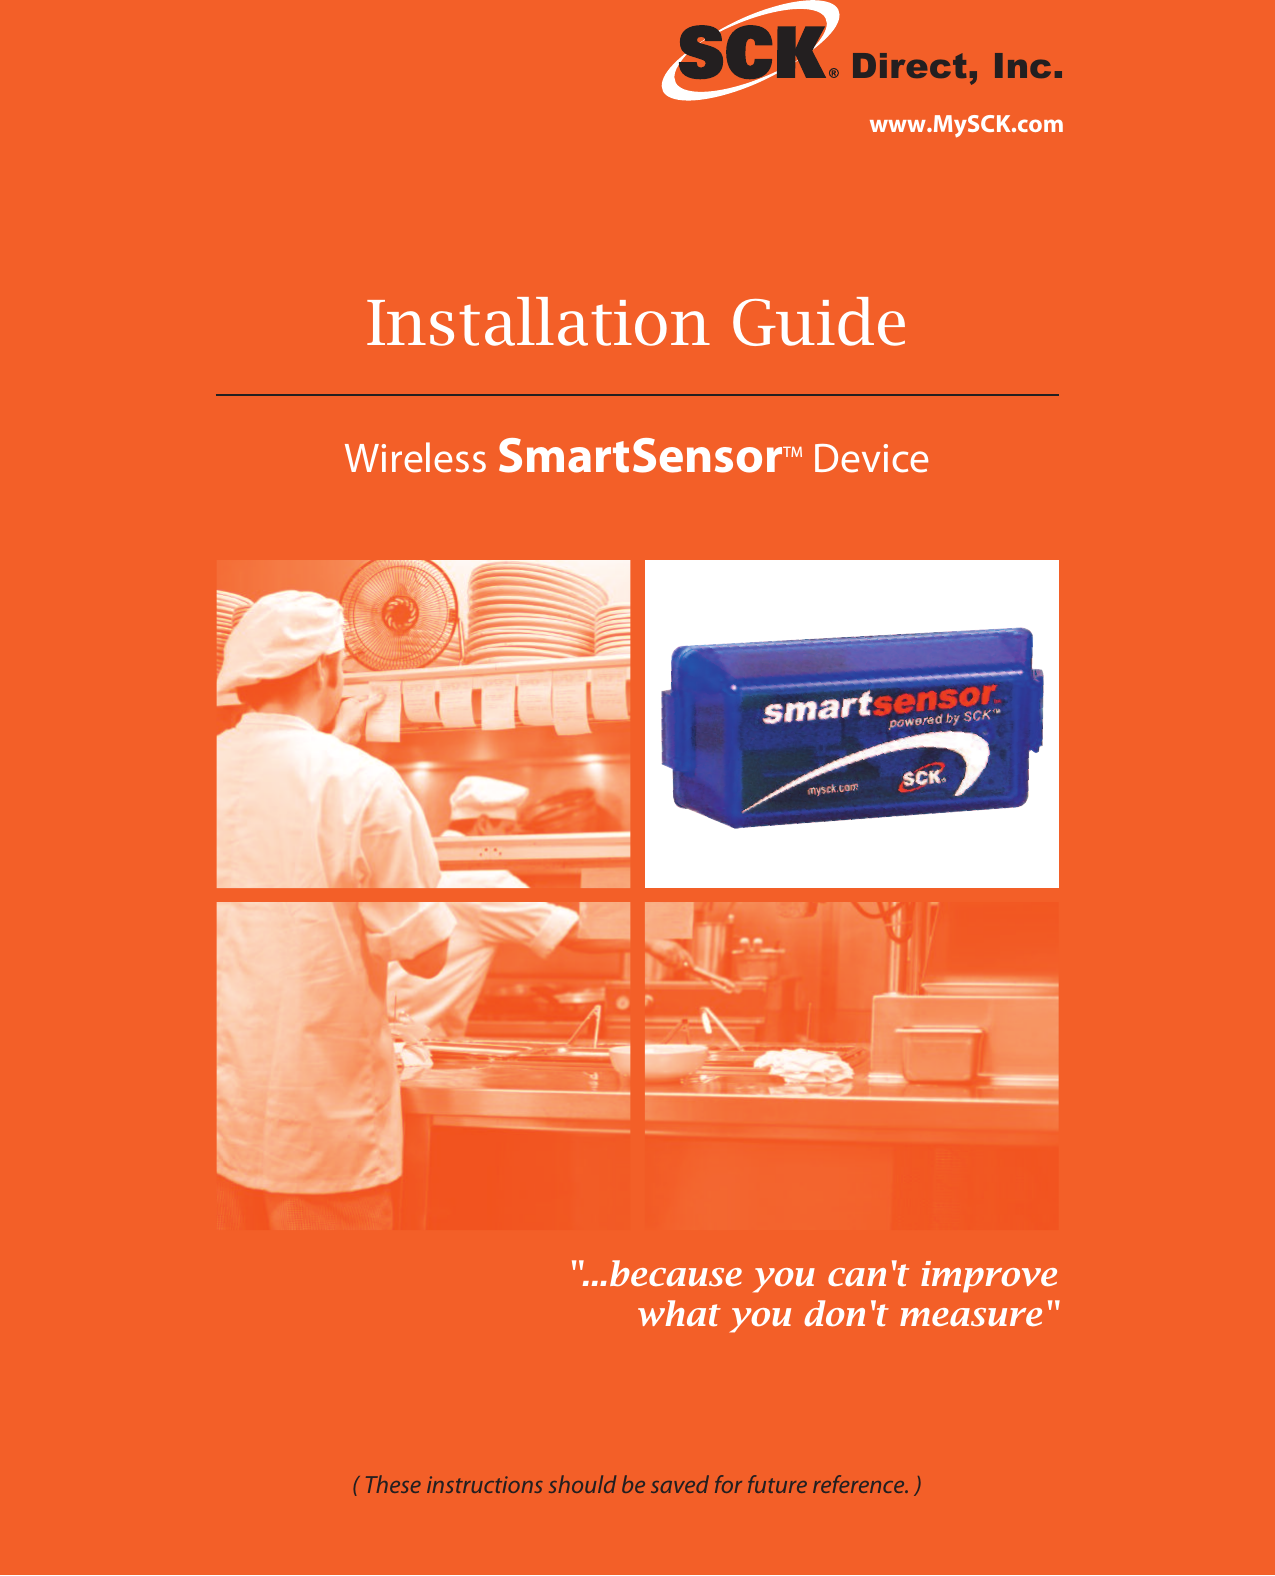 Installation GuideWireless SmartSensorTM DeviceDirect, Inc.&quot;...because you can&apos;t improvewhat you don&apos;t measure&quot;www.MySCK.com( These instructions should be saved for future reference. )